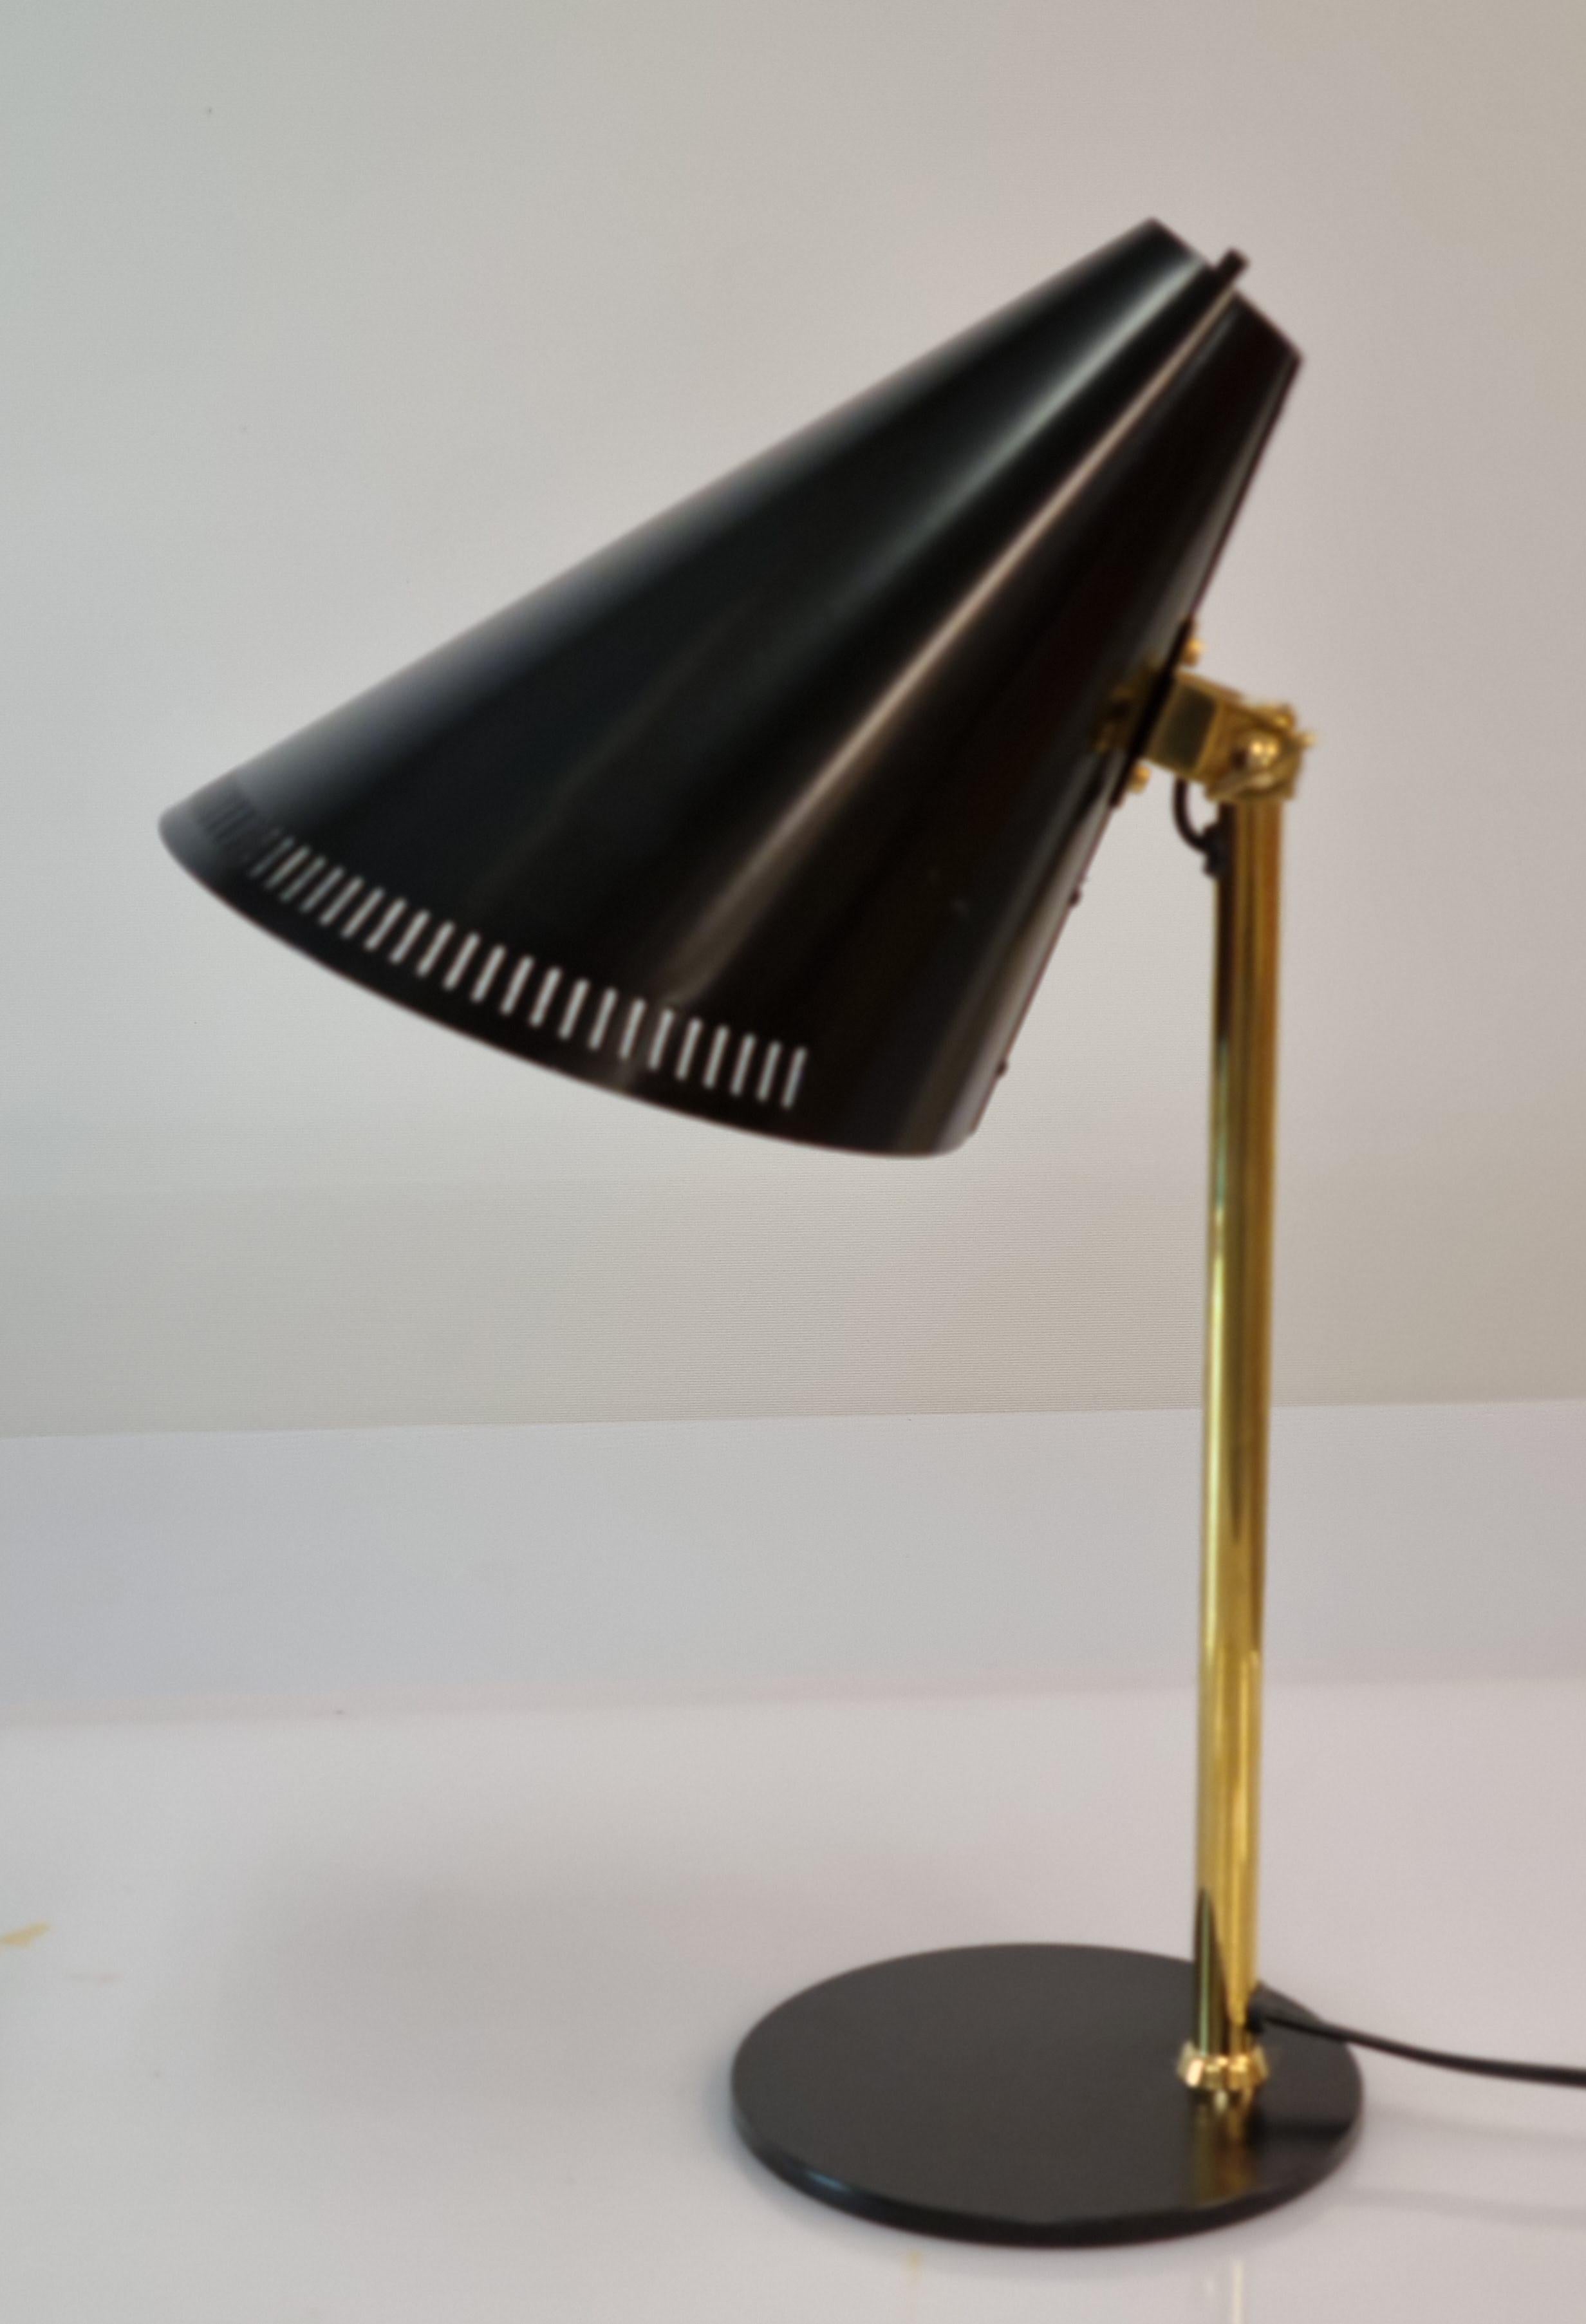 This table lamp model H5-7 by Paavo Tynell is a time lasting and practical model starting from materials. In this model firm brass stem supports aluminum cone shade. The shade is matt black and is adjustable for your needs. The light switch is on